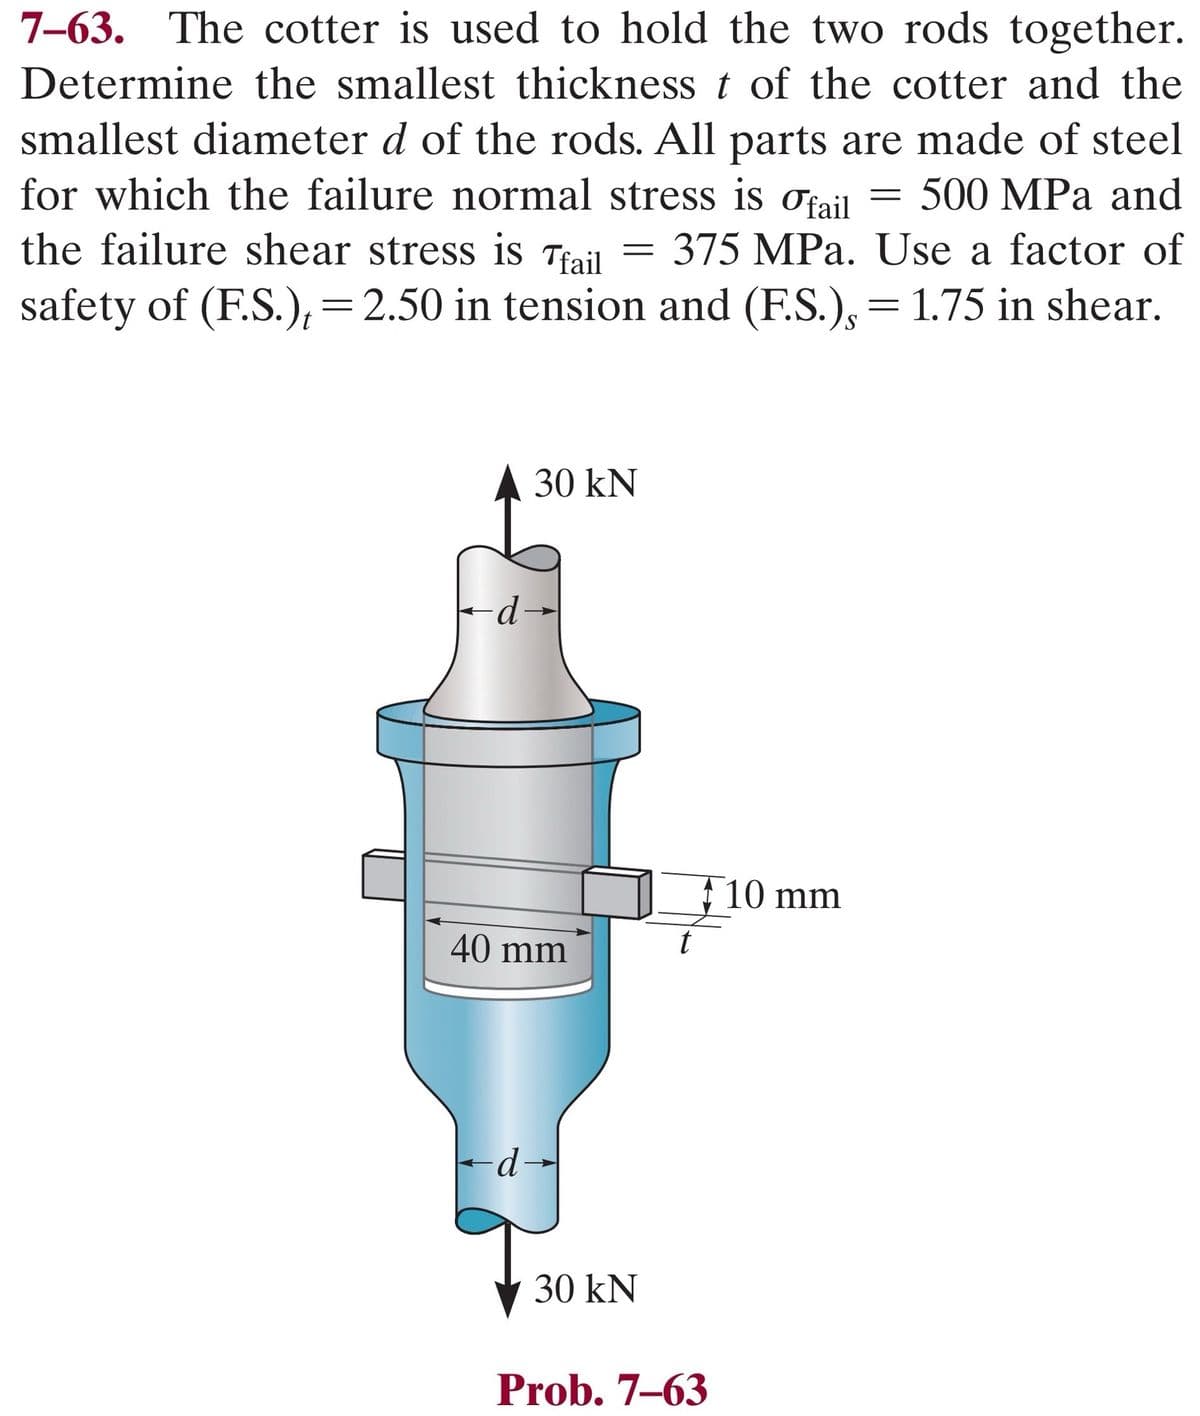 7-63. The cotter is used to hold the two rods together.
Determine the smallest thickness t of the cotter and the
smallest diameter d of the rods. All parts are made of steel
for which the failure normal stress is fail 500 MPa and
the failure shear stress is fail 375 MPa. Use a factor of
safety of (F.S.), = 2.50 in tension and (F.S.), = 1.75 in shear.
-d-
30 kN
40 mm
d
-
30 kN
t
Prob. 7-63
10 mm
=